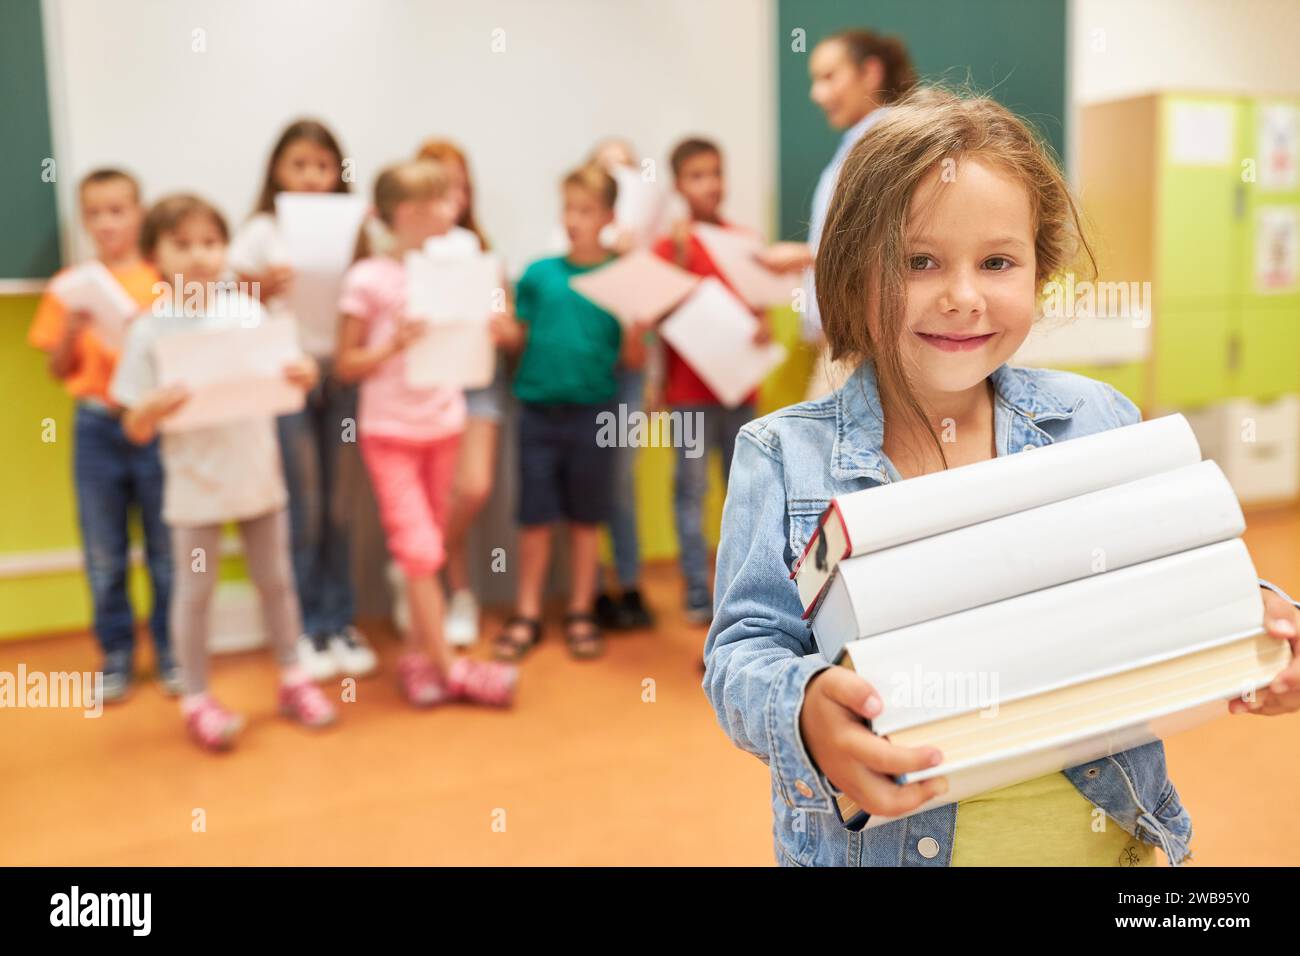 Portrait of smiling schoolgirl holding stack of books while standing in classroom Stock Photo